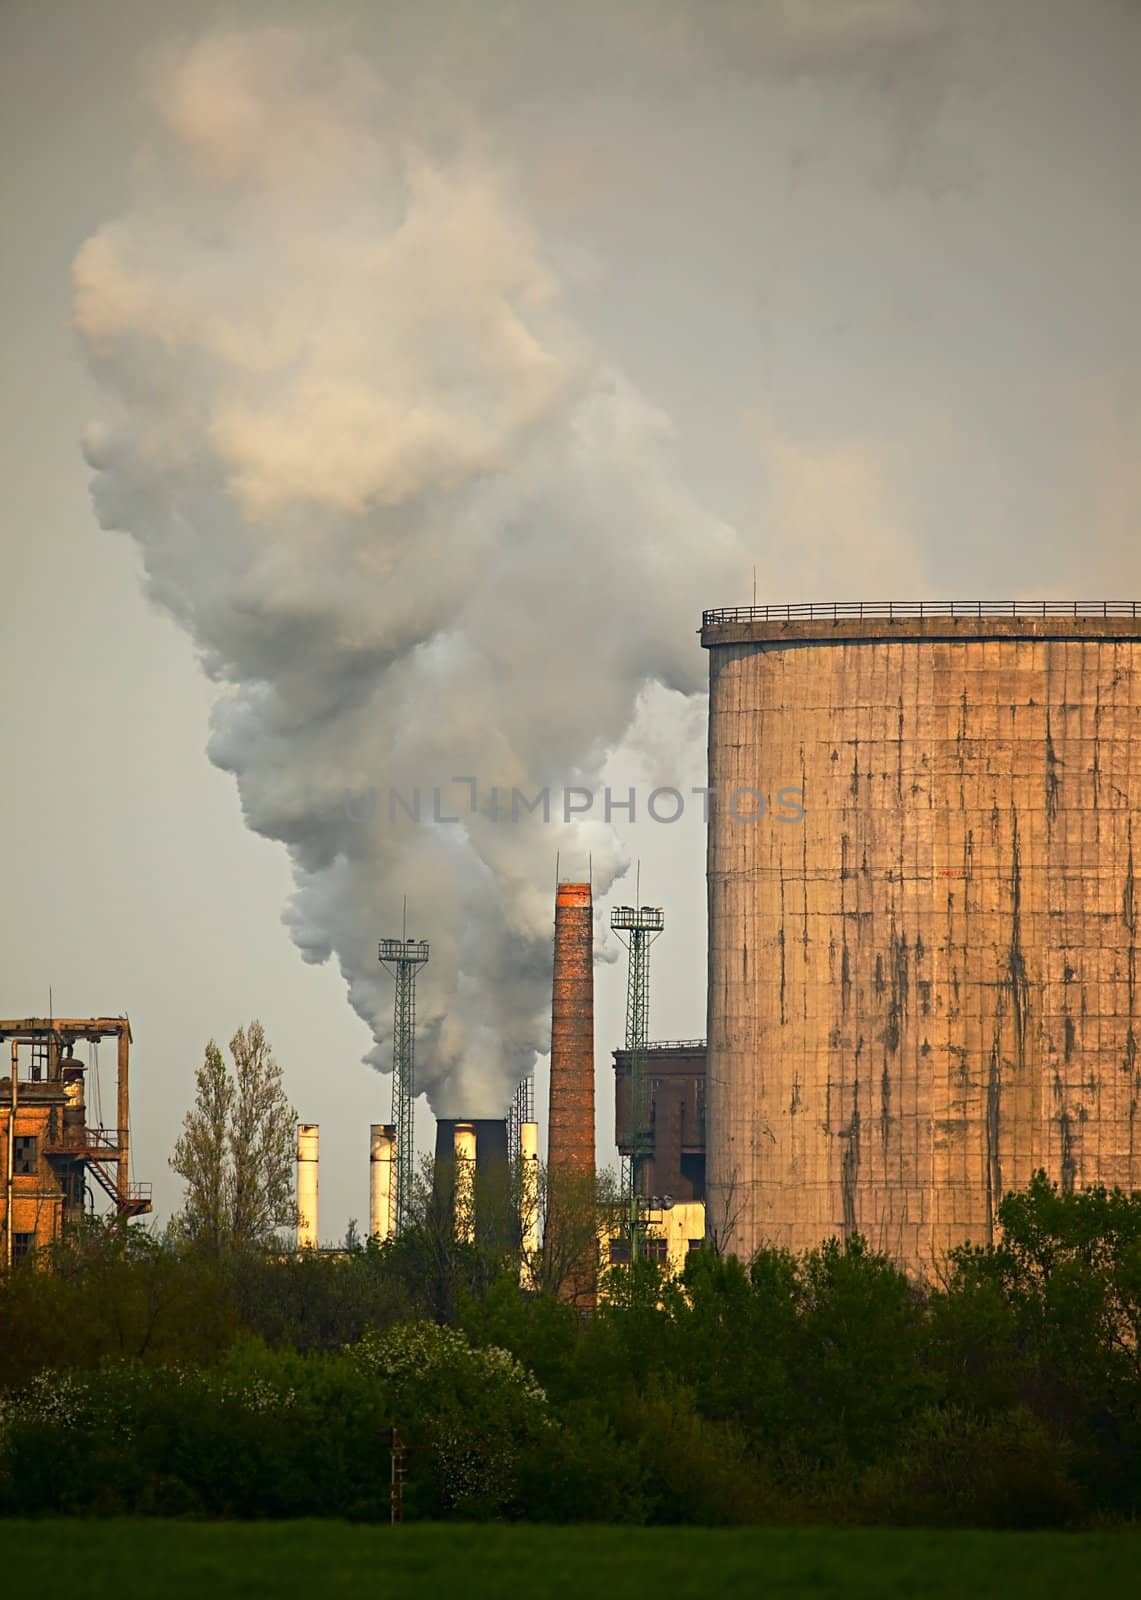 Old, smoking industrial plants